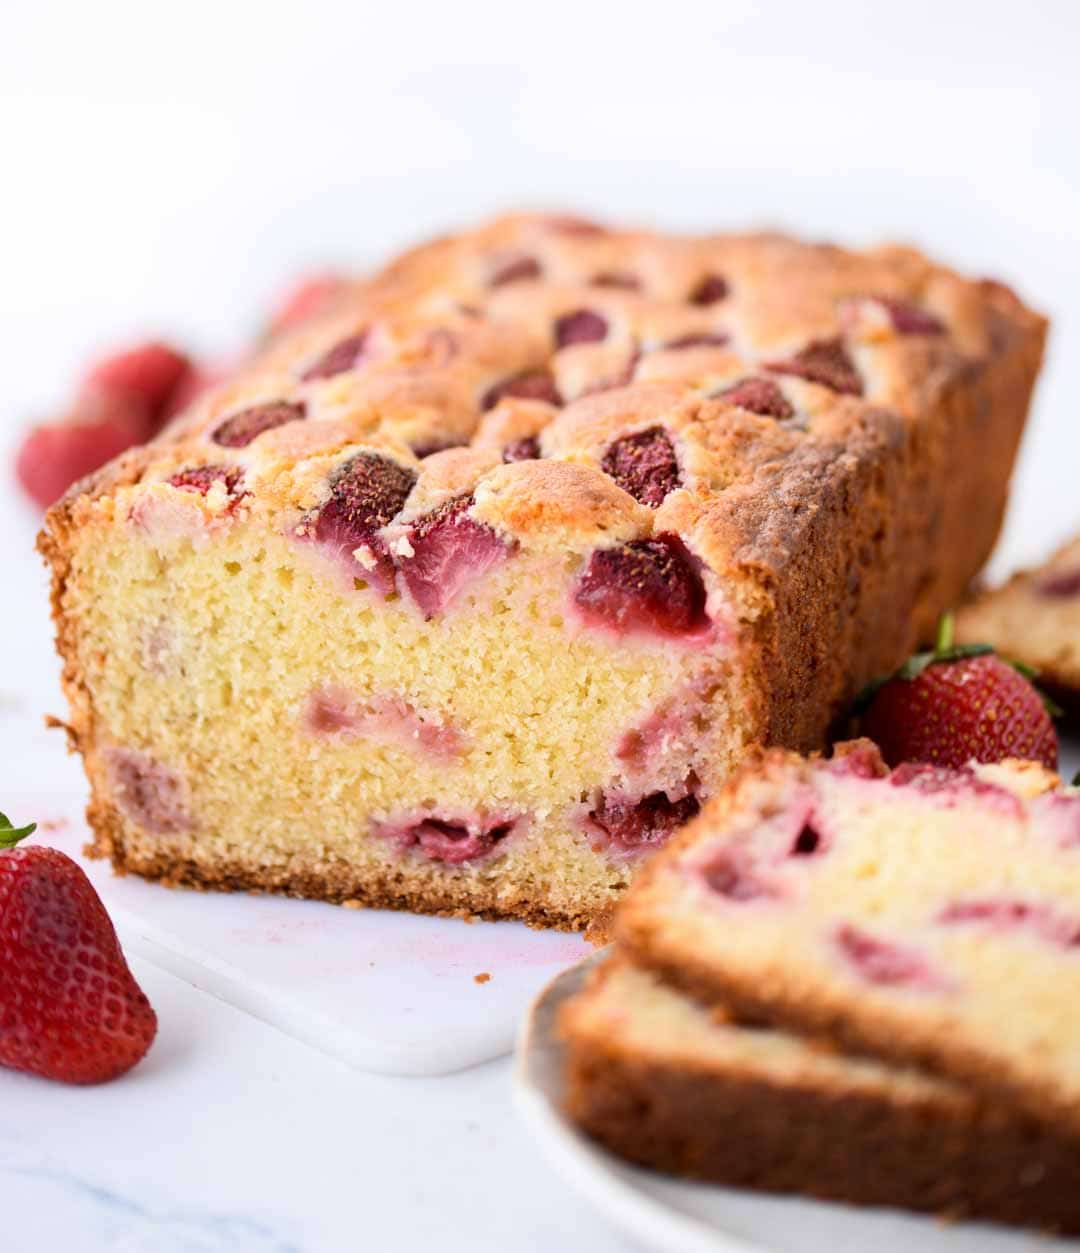 Strawberry Cake with loads of fresh strawberries is made from scratch with basic pantry staples. You will get to taste strawberry in every bite of this buttery, moist and delicious cake.